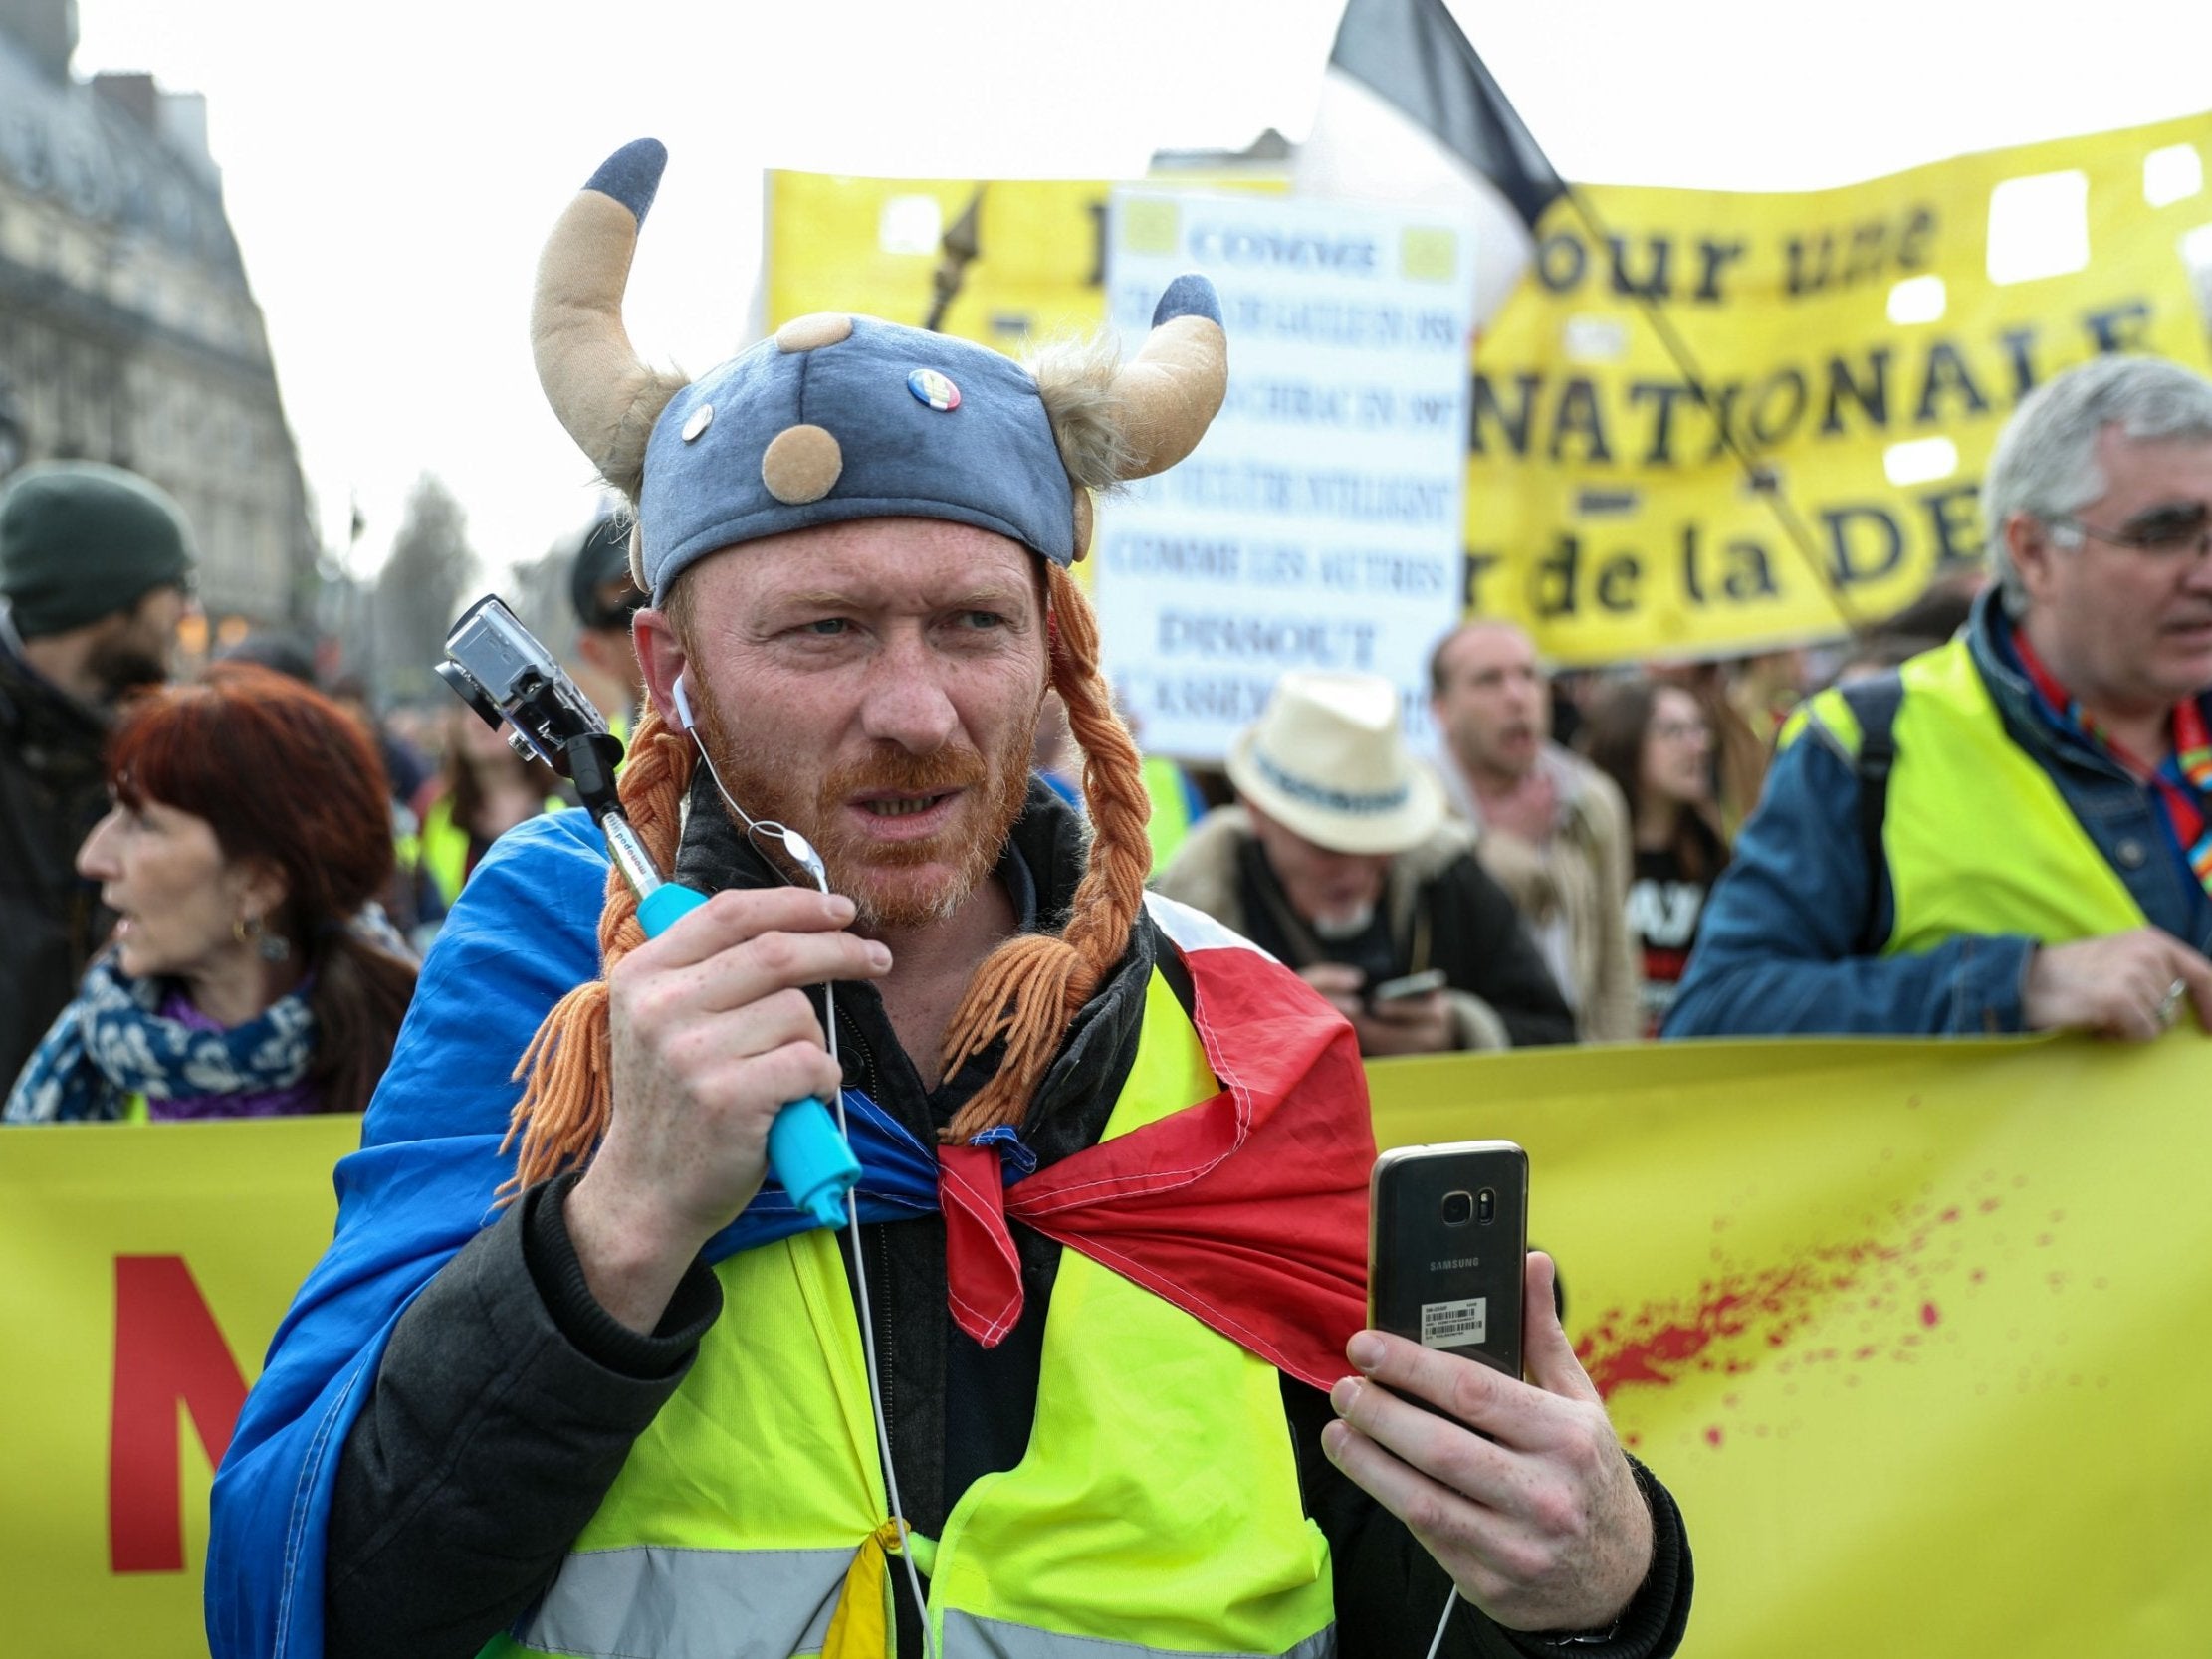 A Yellow Vest protester dressed as a Gaul takes part in an anti-government demonstration called by the 'Yellow Vest' (gilets jaunes) movement in Paris, on March 23, 2019. Demonstrators hit French city streets again on March 23 for the 19th consecutive week of nationwide protest against the French President's policies and his top-down style of governing, high cost of living, government tax reforms and for more "social and economic justice."